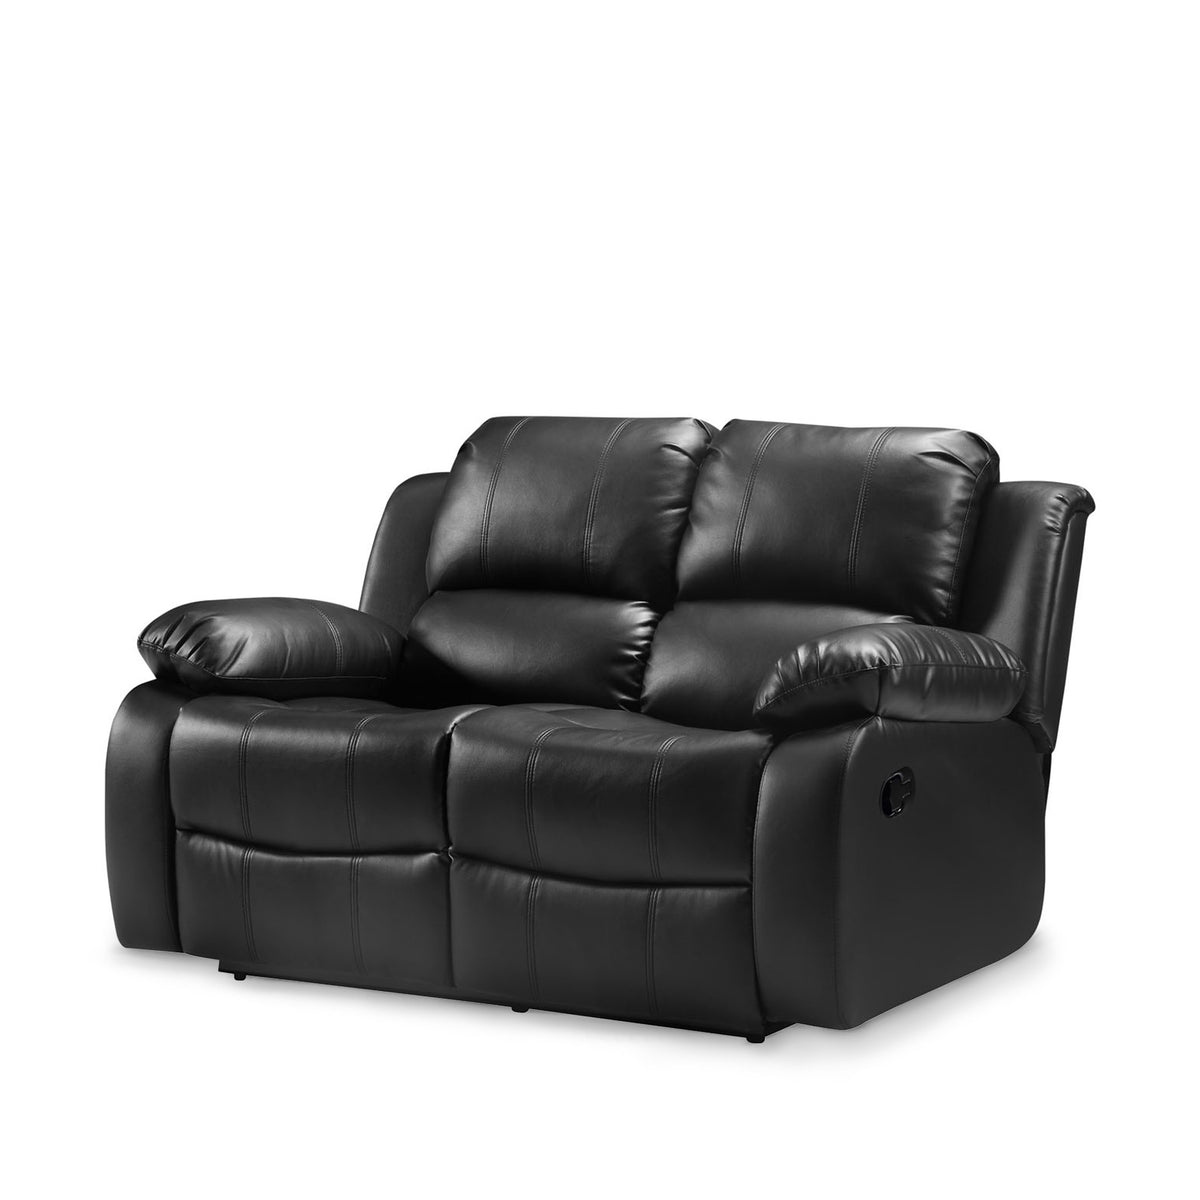 Valencia Black 2 Seater Reclining Air Leather Sofa - Side view